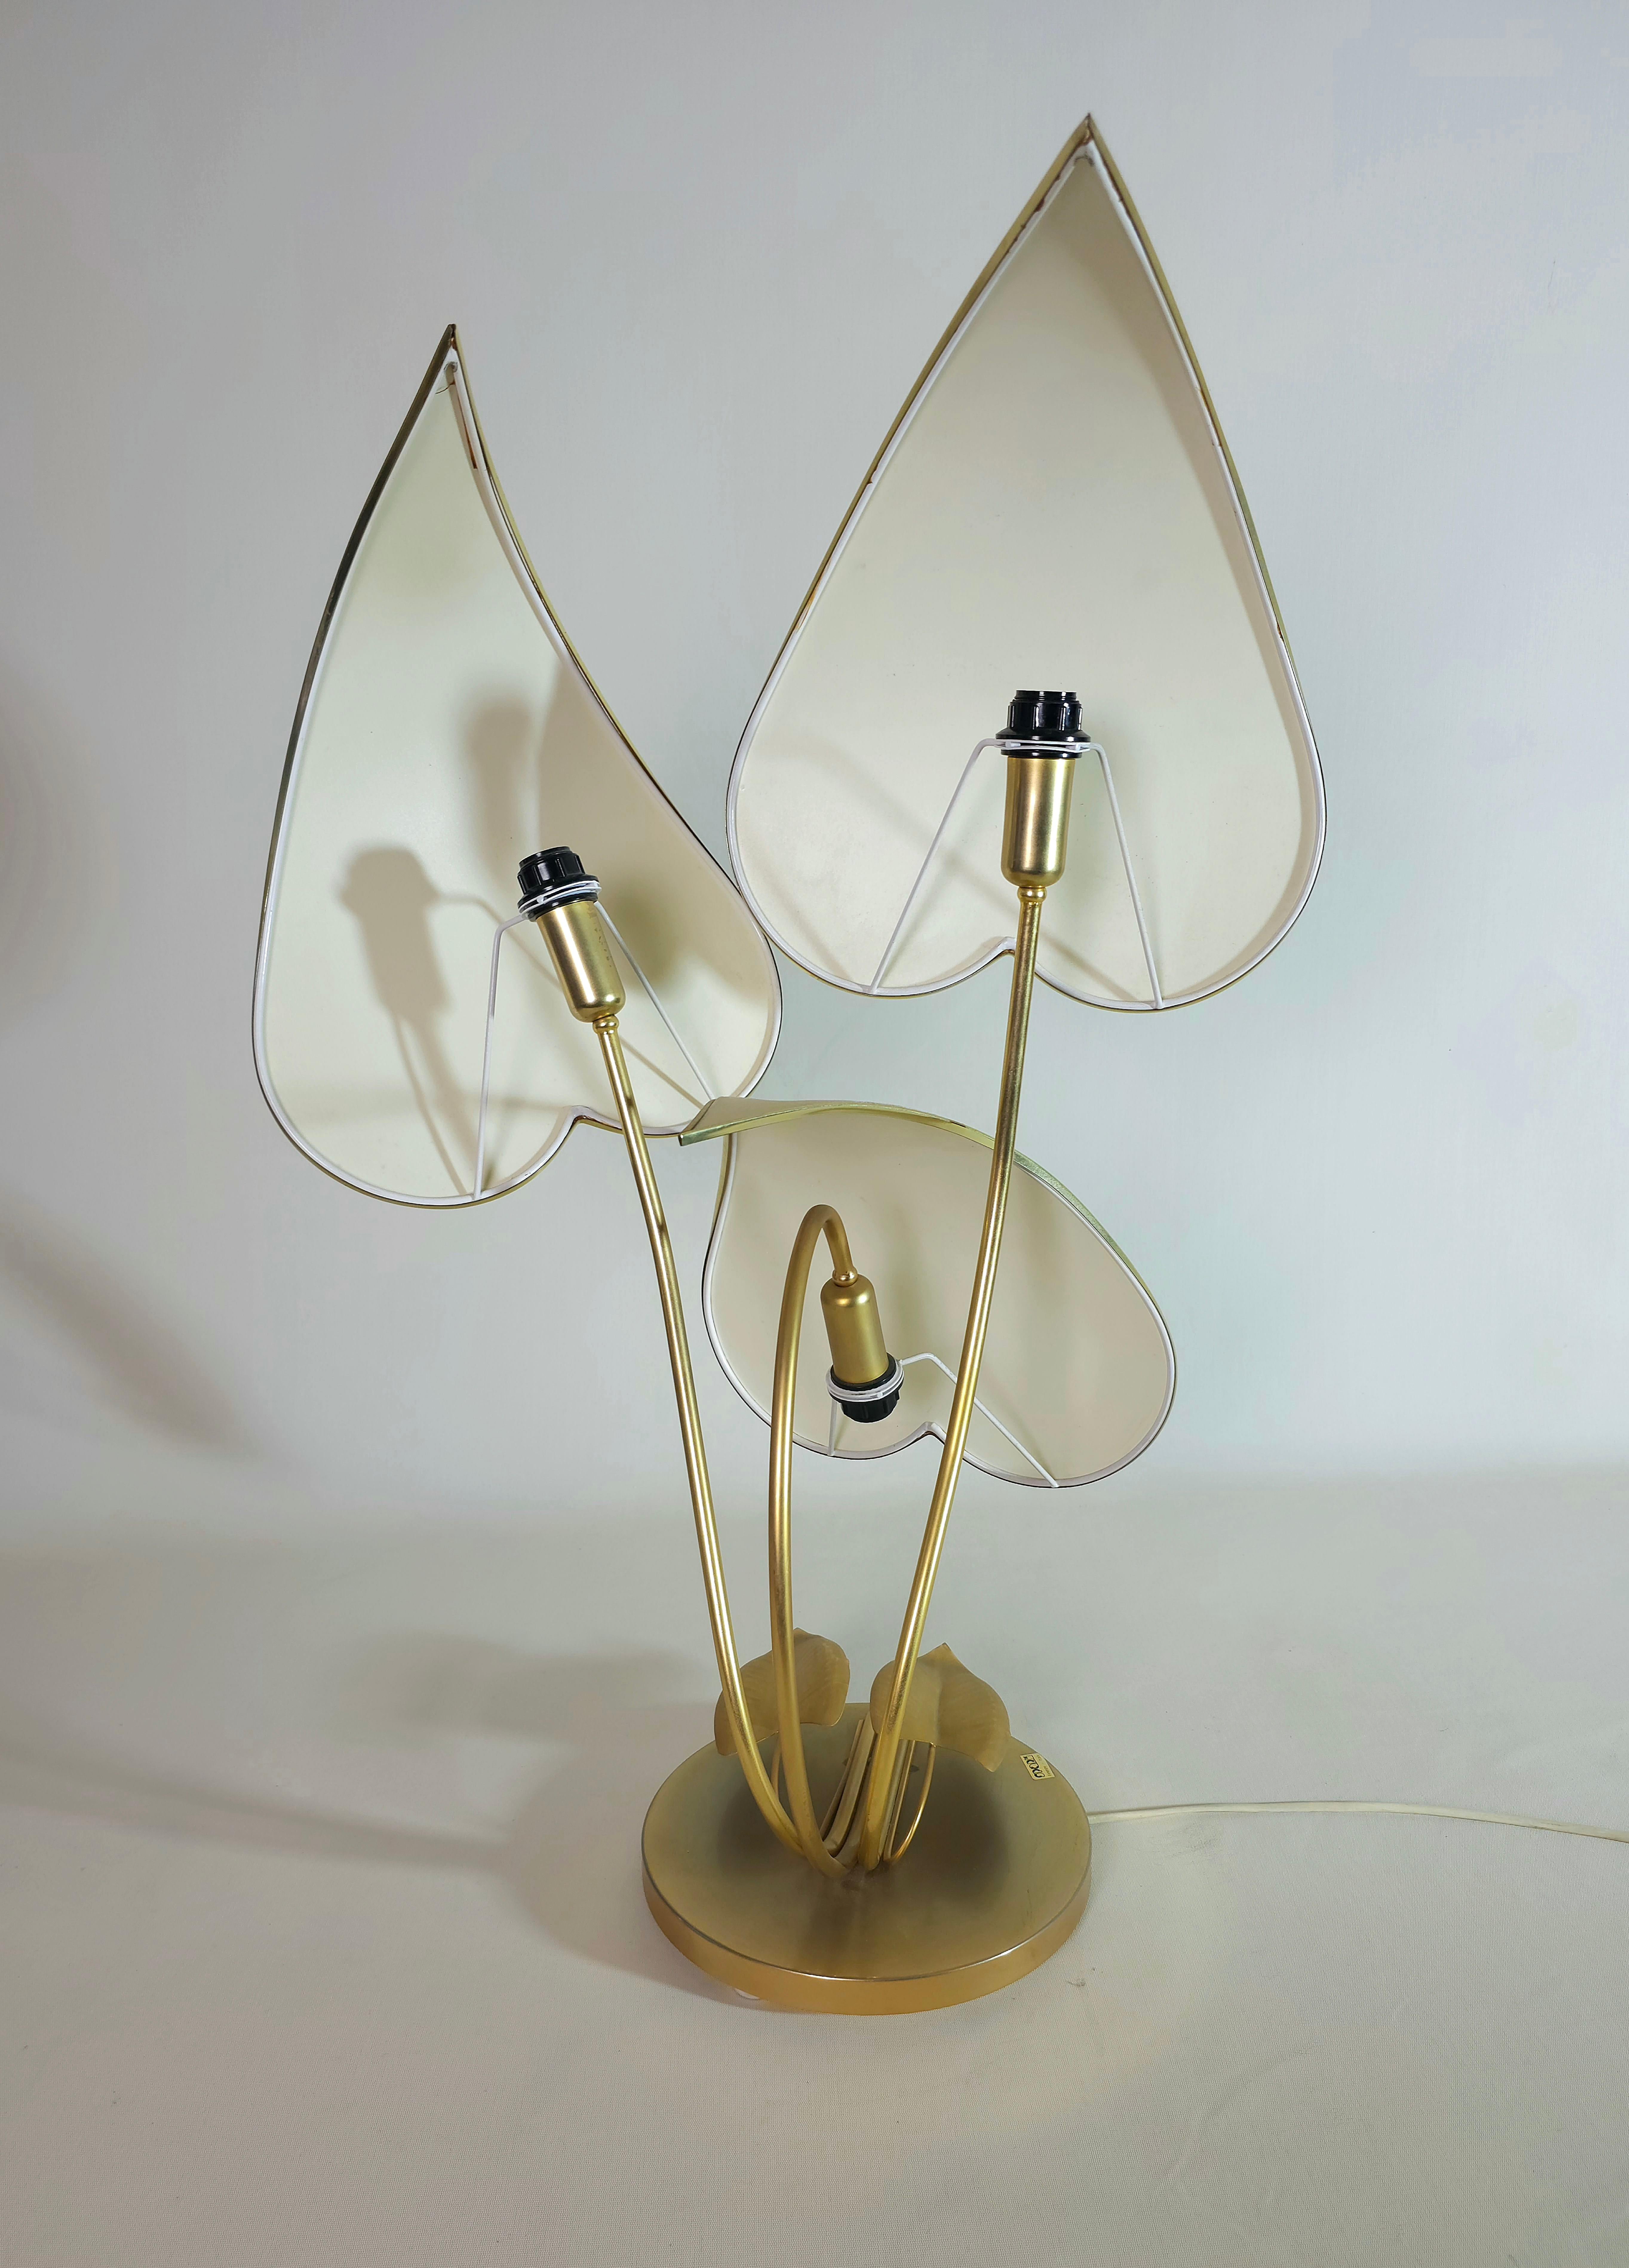 Fabric Table Lamps  Brass Midcentury Modern Design Italy 1970s